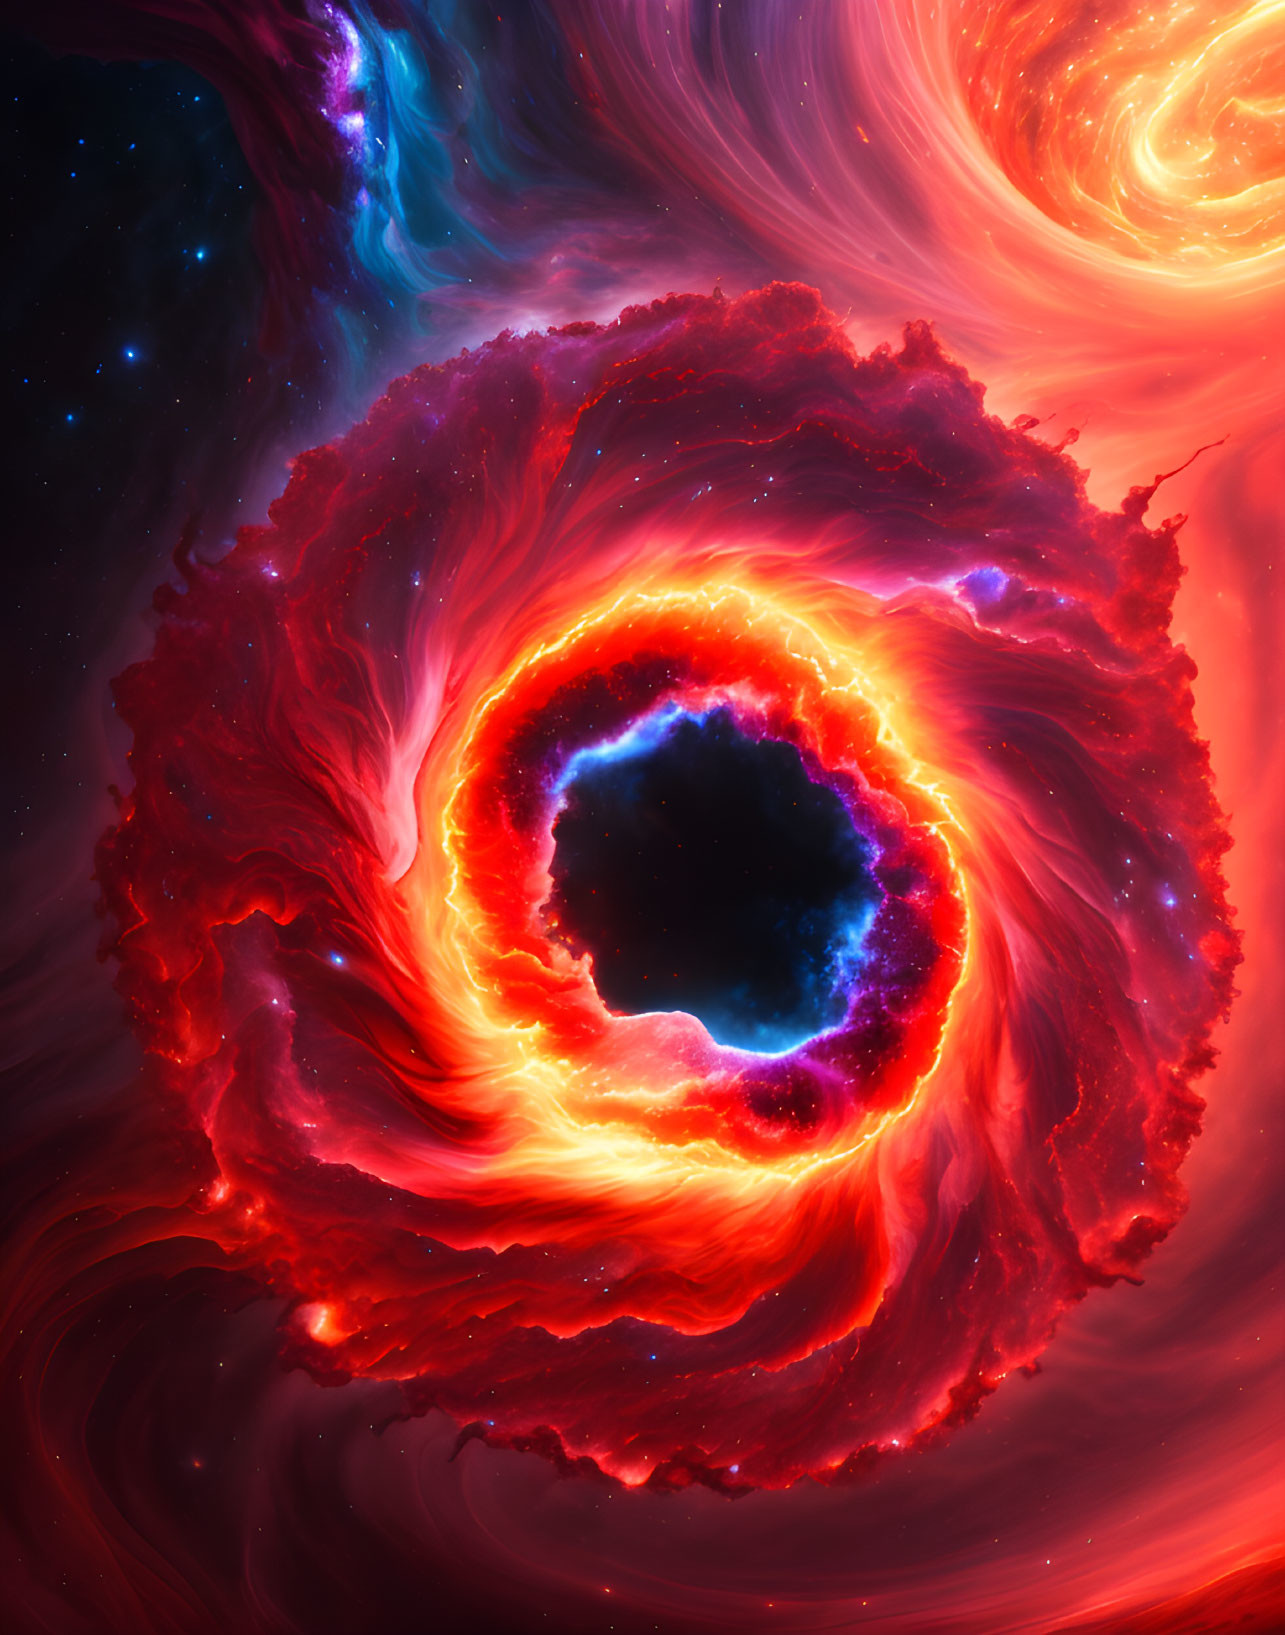 Colorful cosmic scene with swirling red and blue nebula around a glowing eye-like center